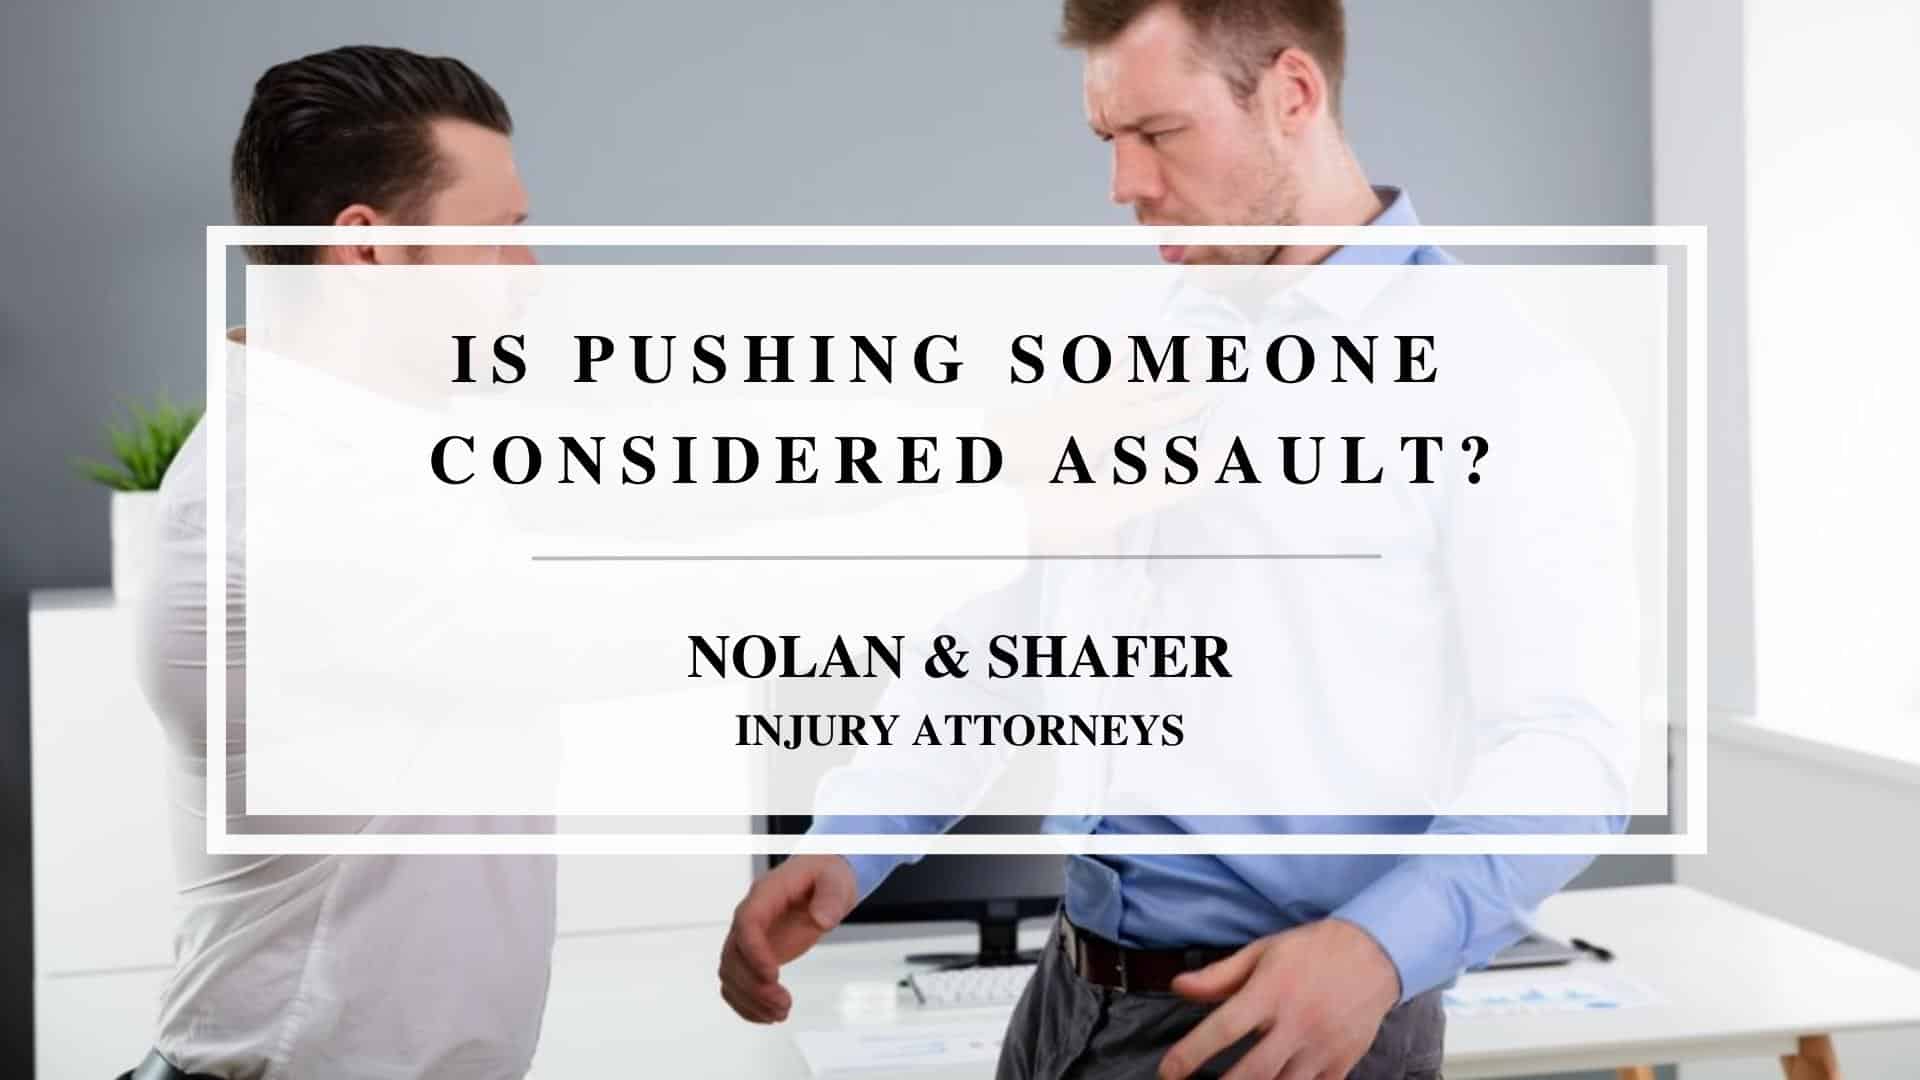 Featured image of pushing someone considered assault?